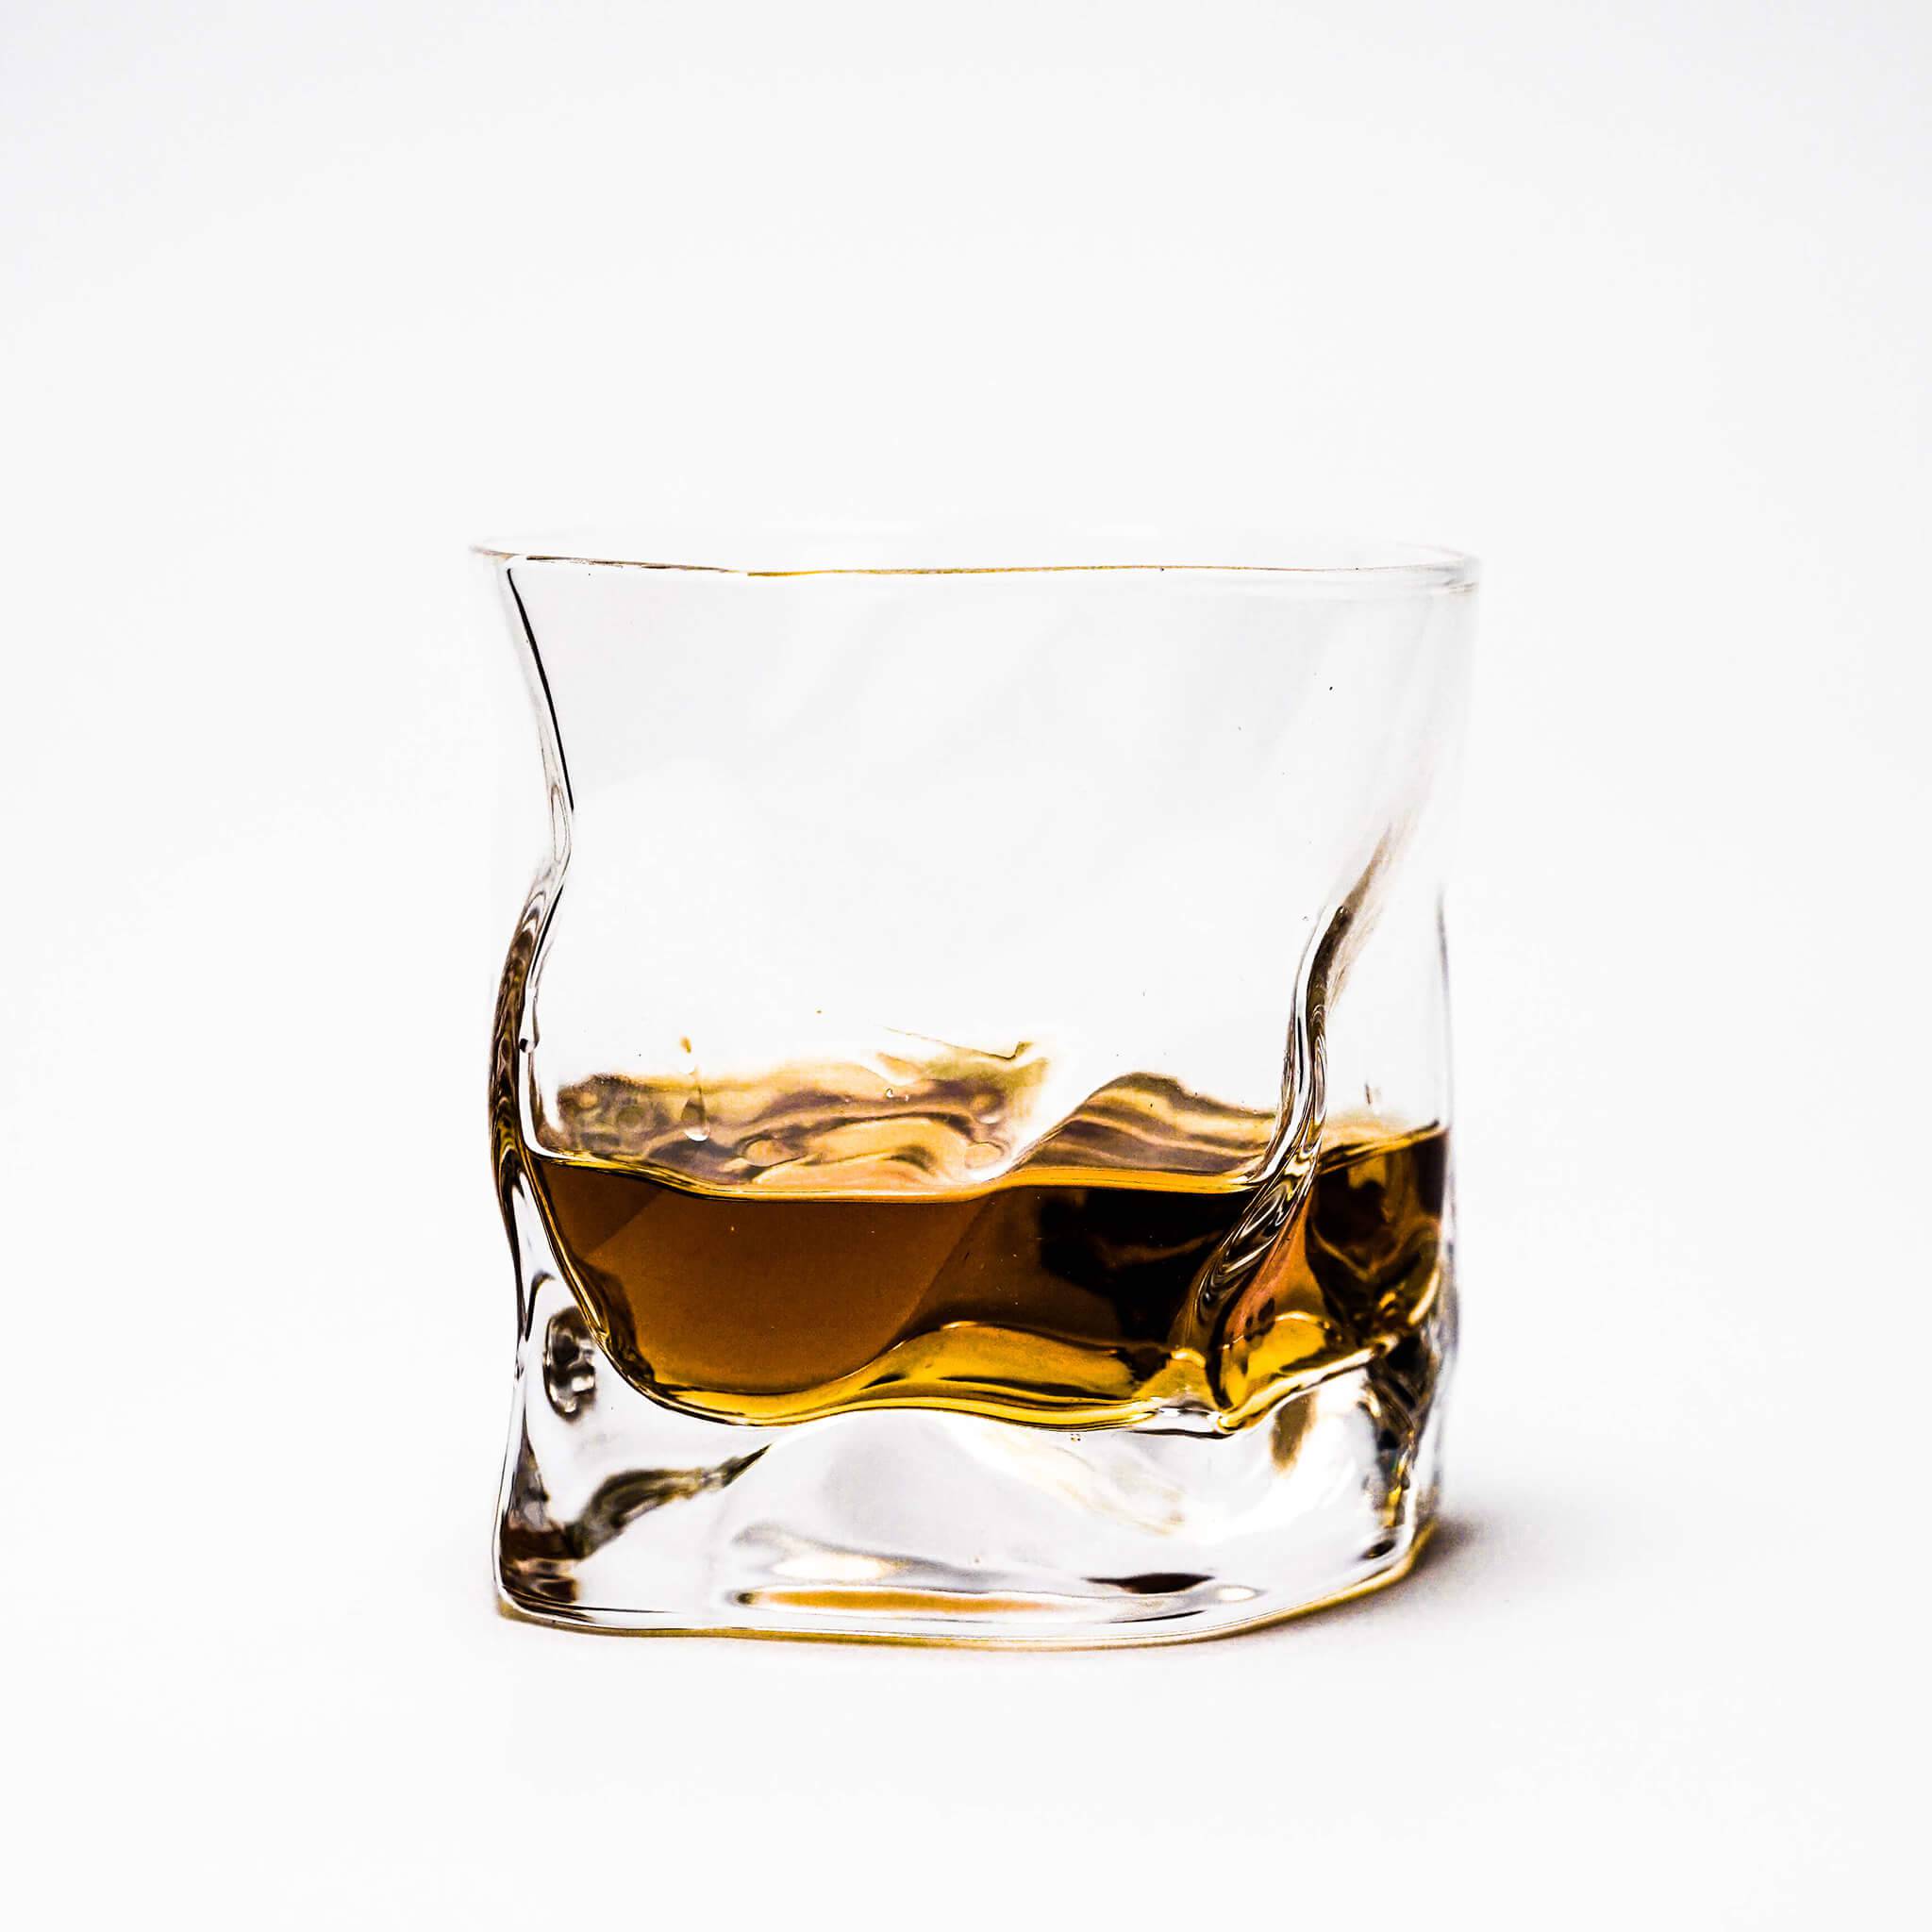 Purchase Togouchi Premium + 2 Glasses Whisky Online - Low Prices